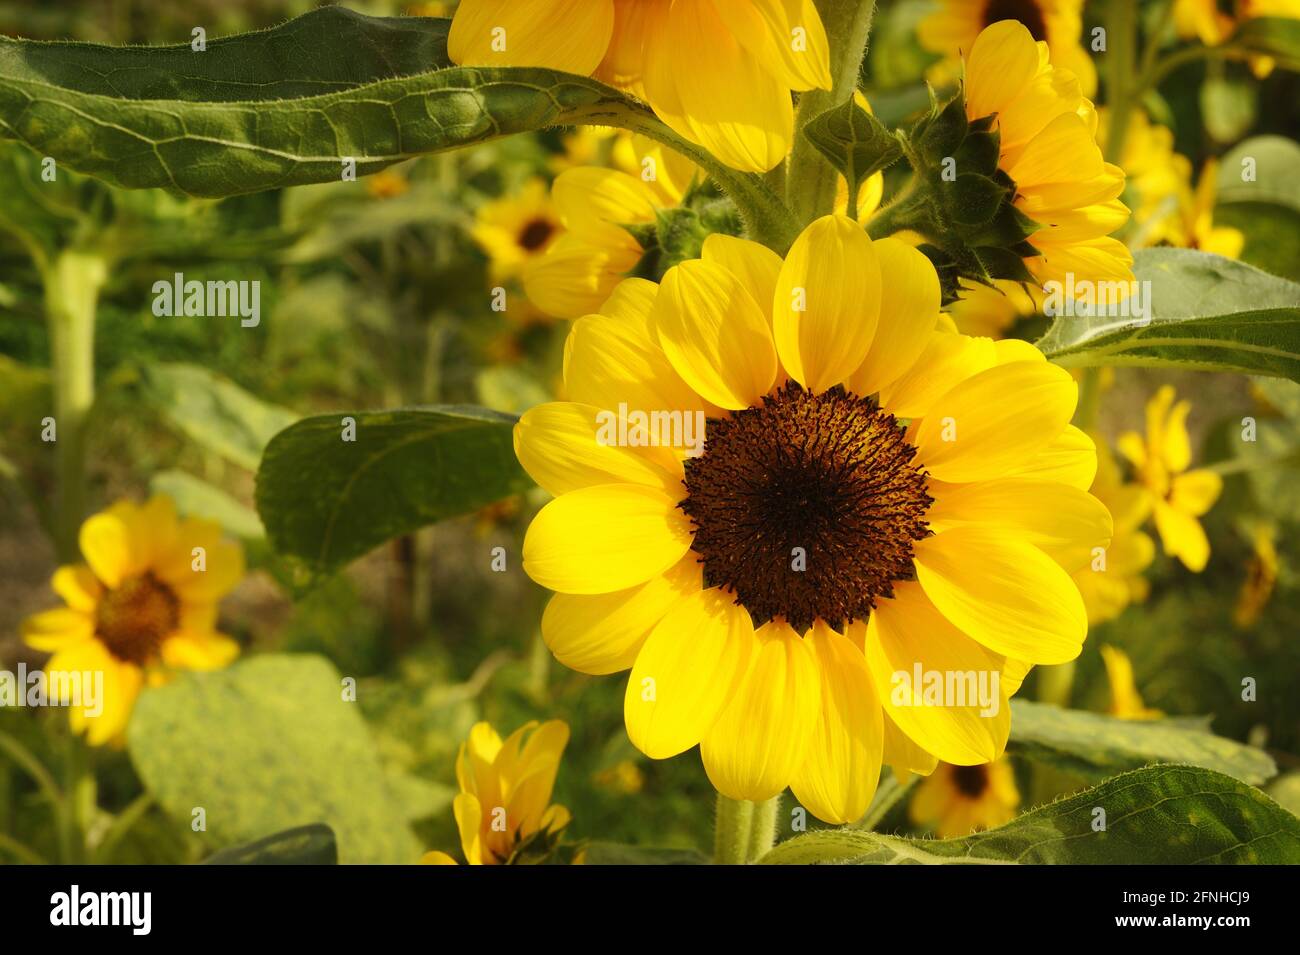 sunflower is blooming in the garden Stock Photo